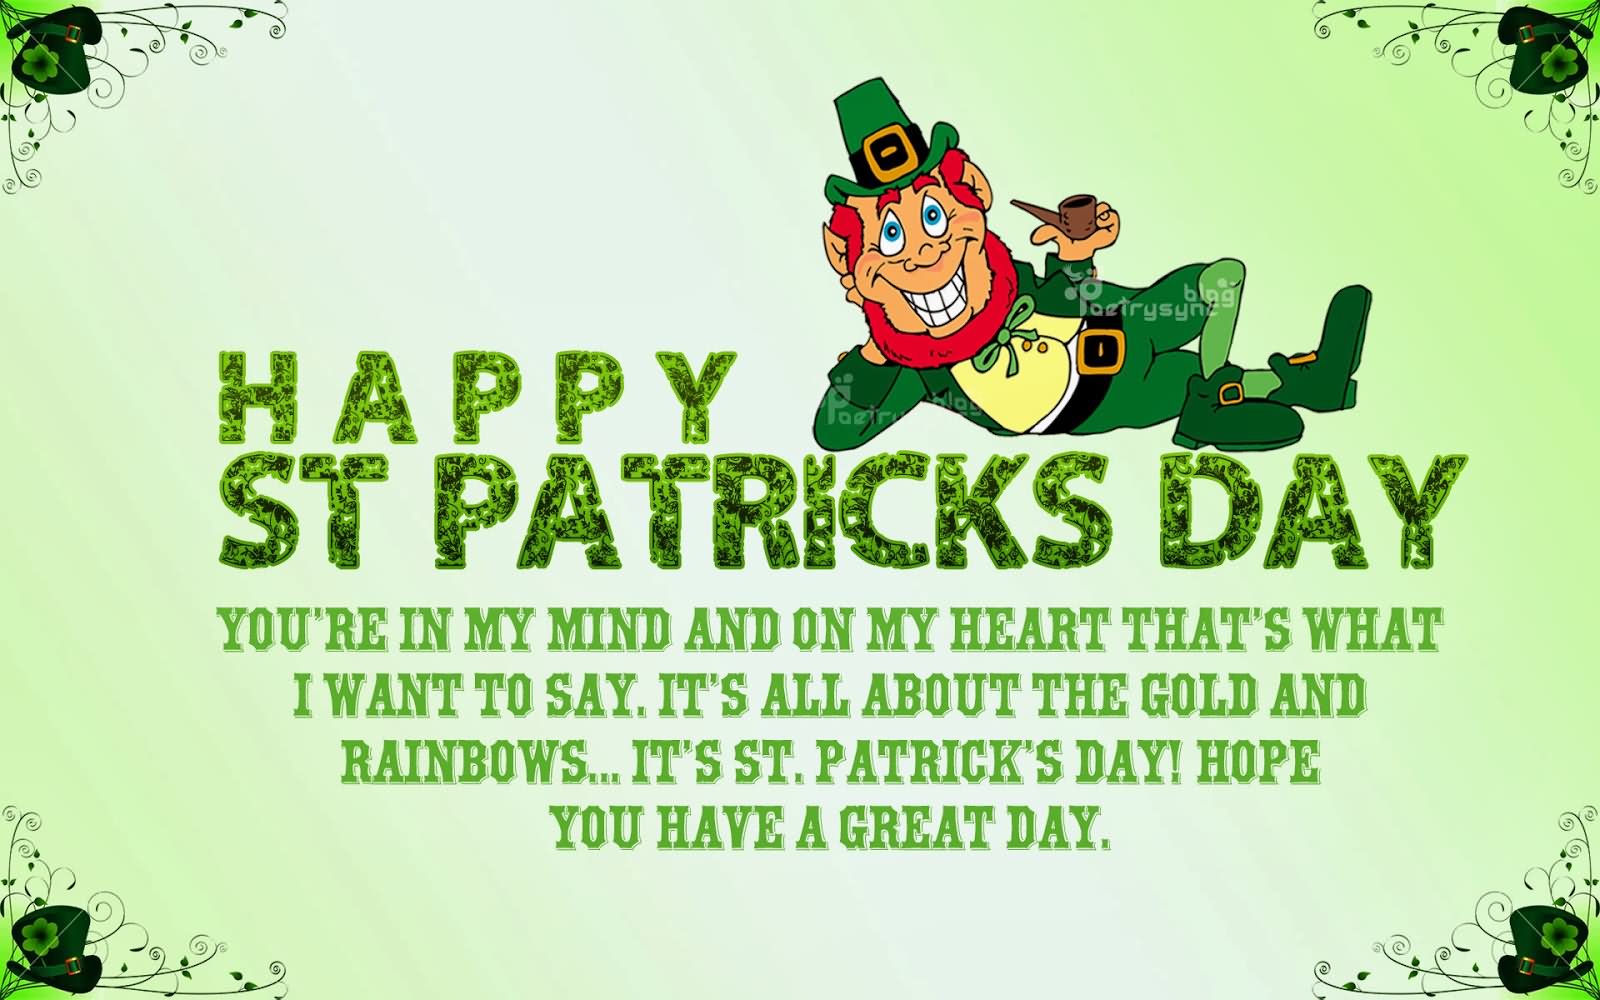 Happy Saint Patrick’s Day. You,re in my mind and on my heart that’s what i want to say, it’s all about the gold and rainbows… It’s Saint Patrick’s Day, Hope you have a great day.